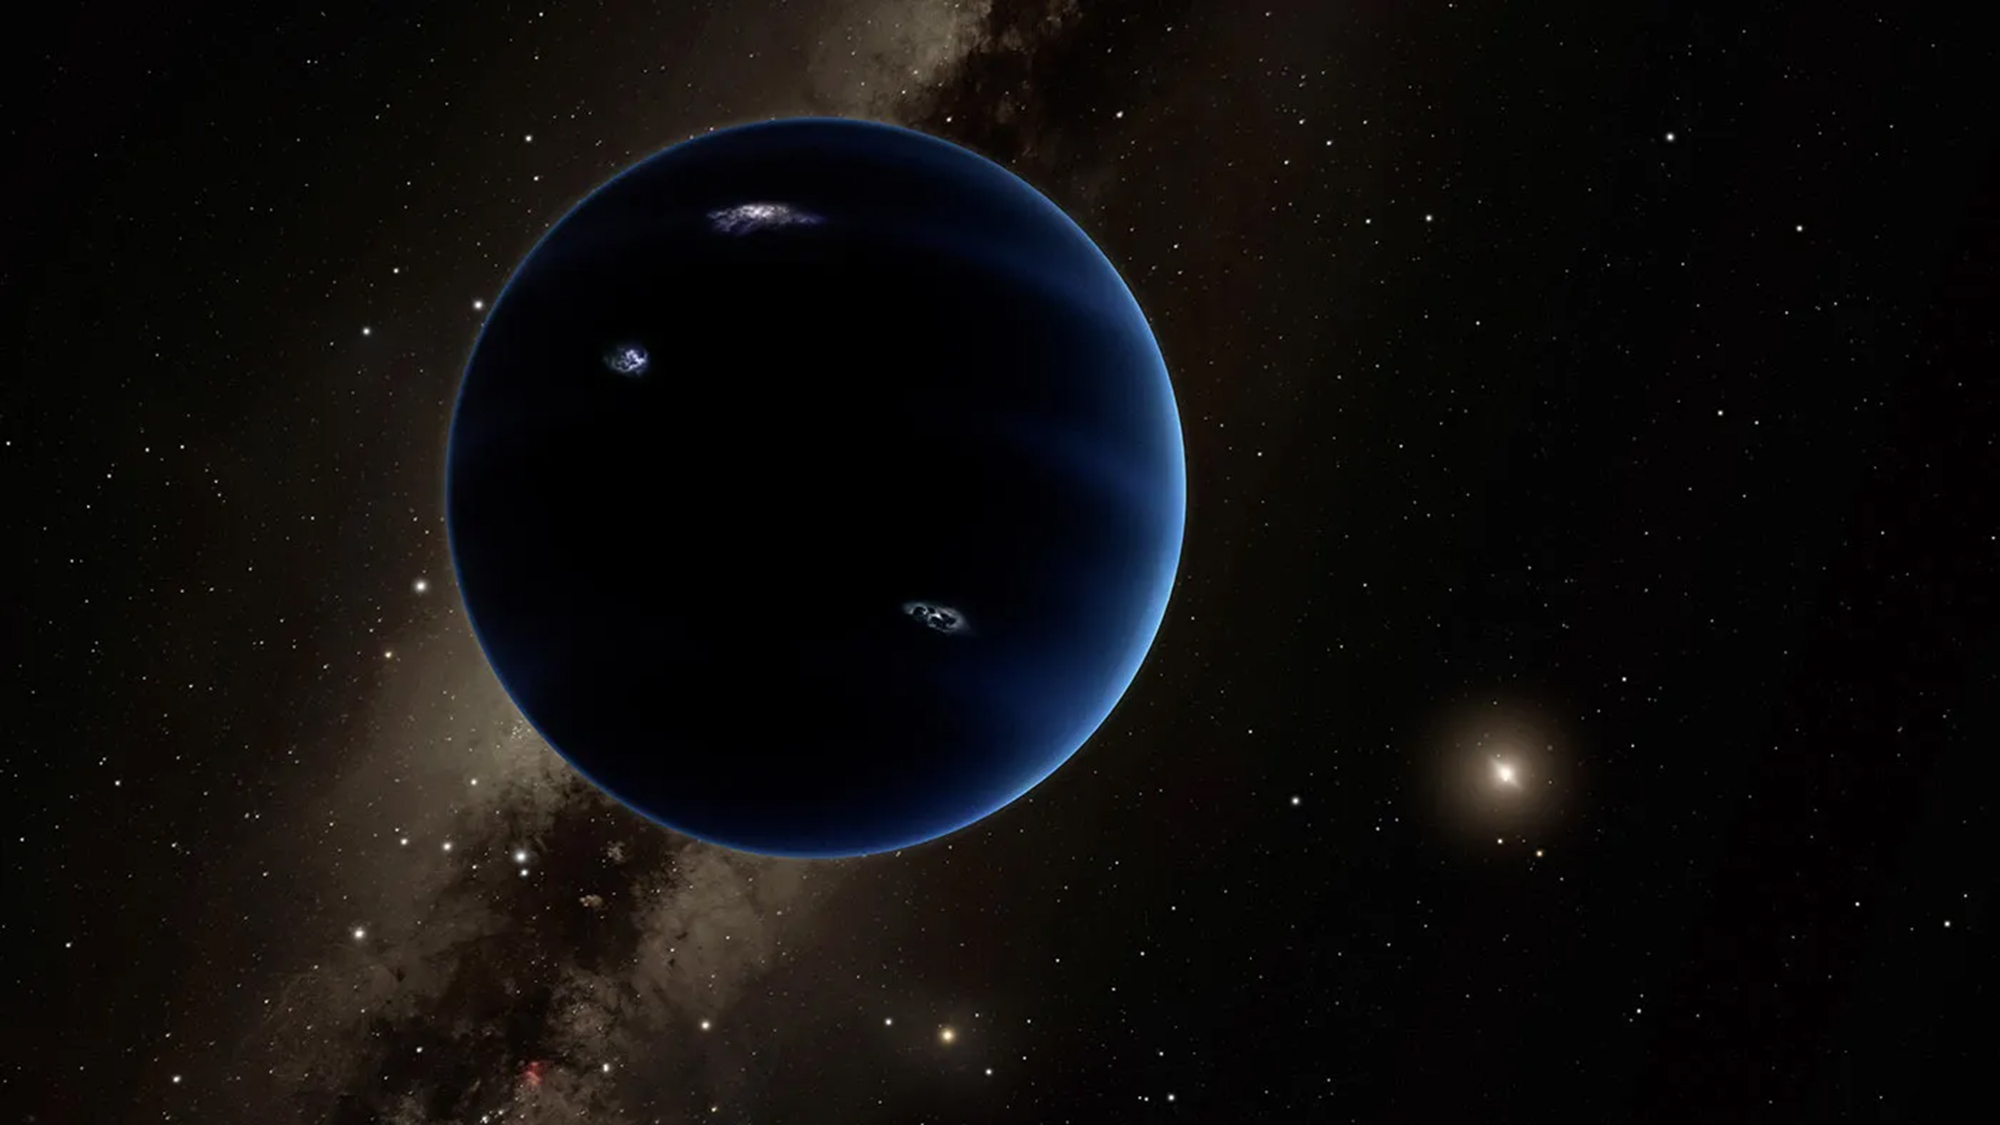 Artist's concept of a hypothetical planet orbiting far from the Sun.